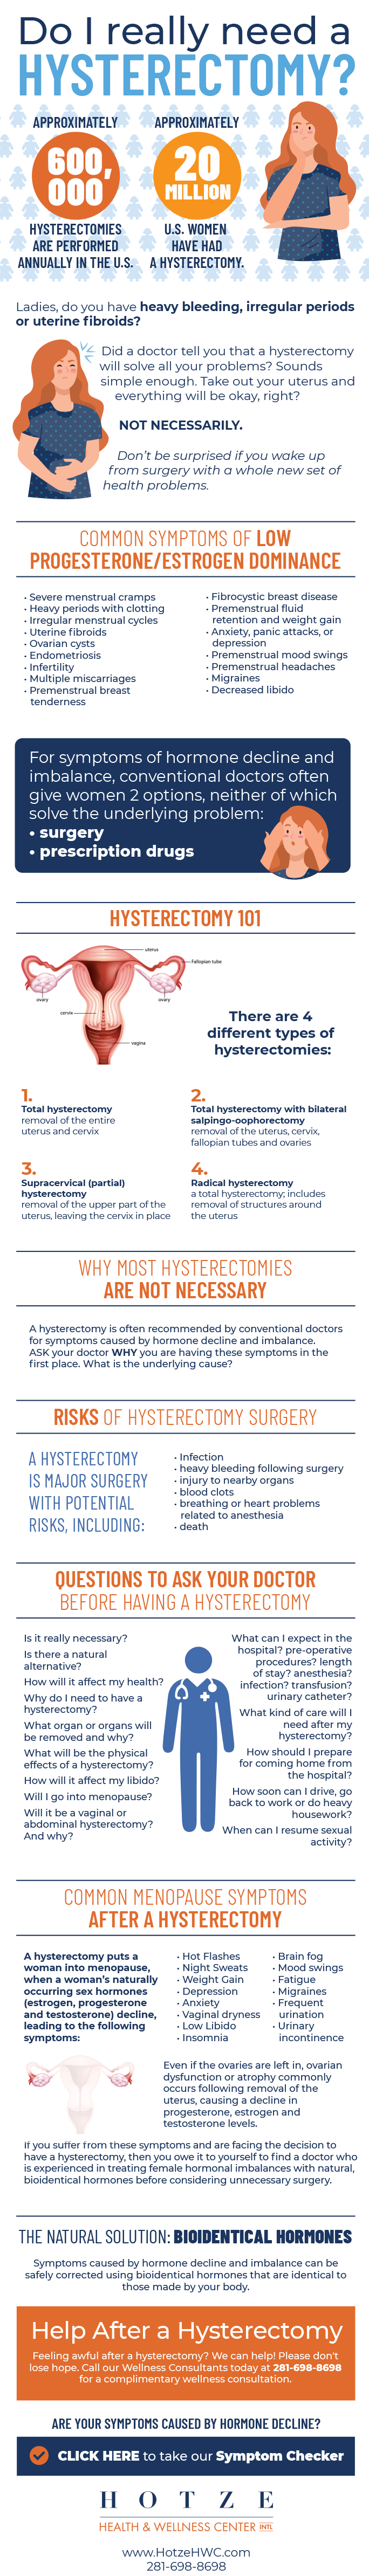 hysterectomy infographic